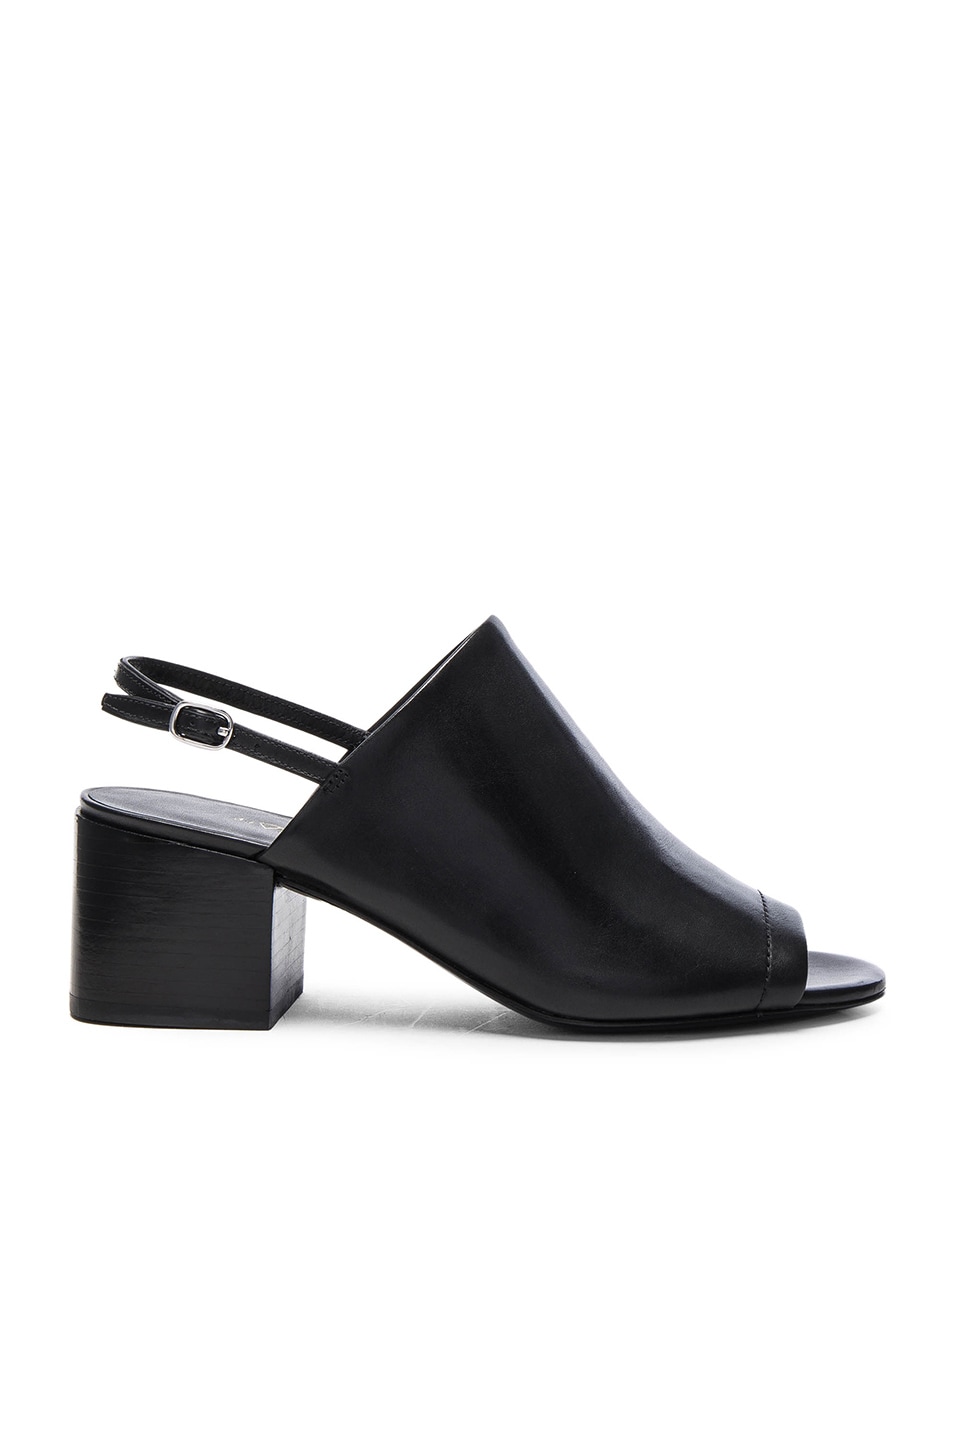 Image 1 of 3.1 phillip lim Leather Cube Slingback Heels in Black